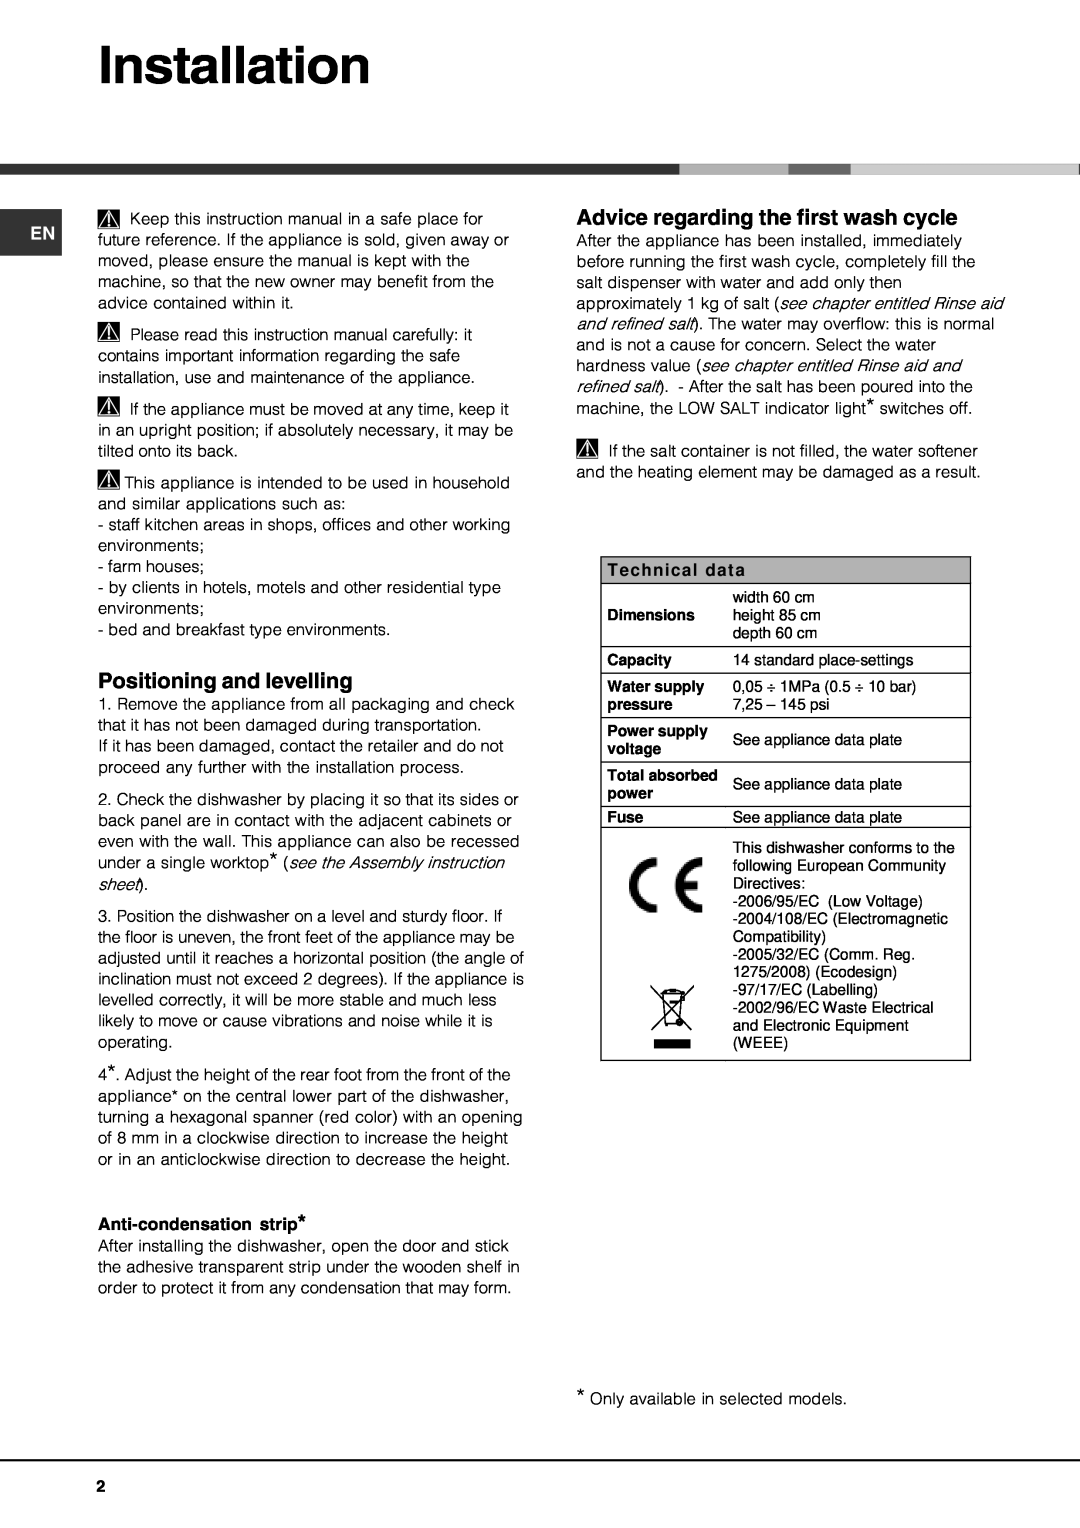 Hotpoint FDUD4212 Installation, Positioning and levelling, Advice regarding the first wash cycle, Anti-condensation strip 